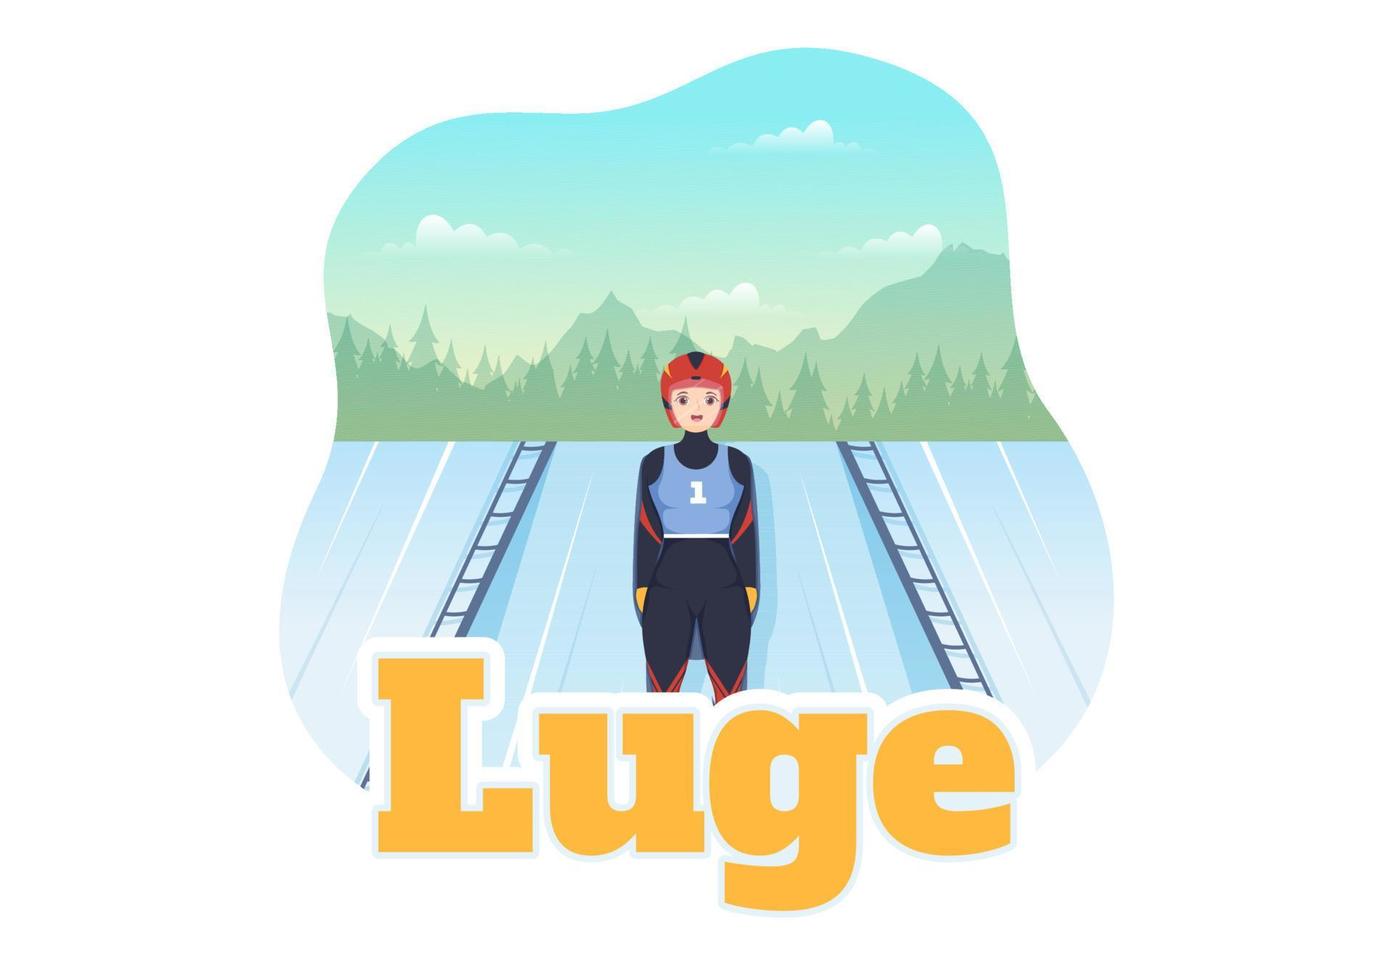 Luge Sled Race Athlete Winter Sport Illustration with Riding a Sledding, Ice and Bobsleigh in Flat Cartoon Hand Drawn for Landing Page Templates vector